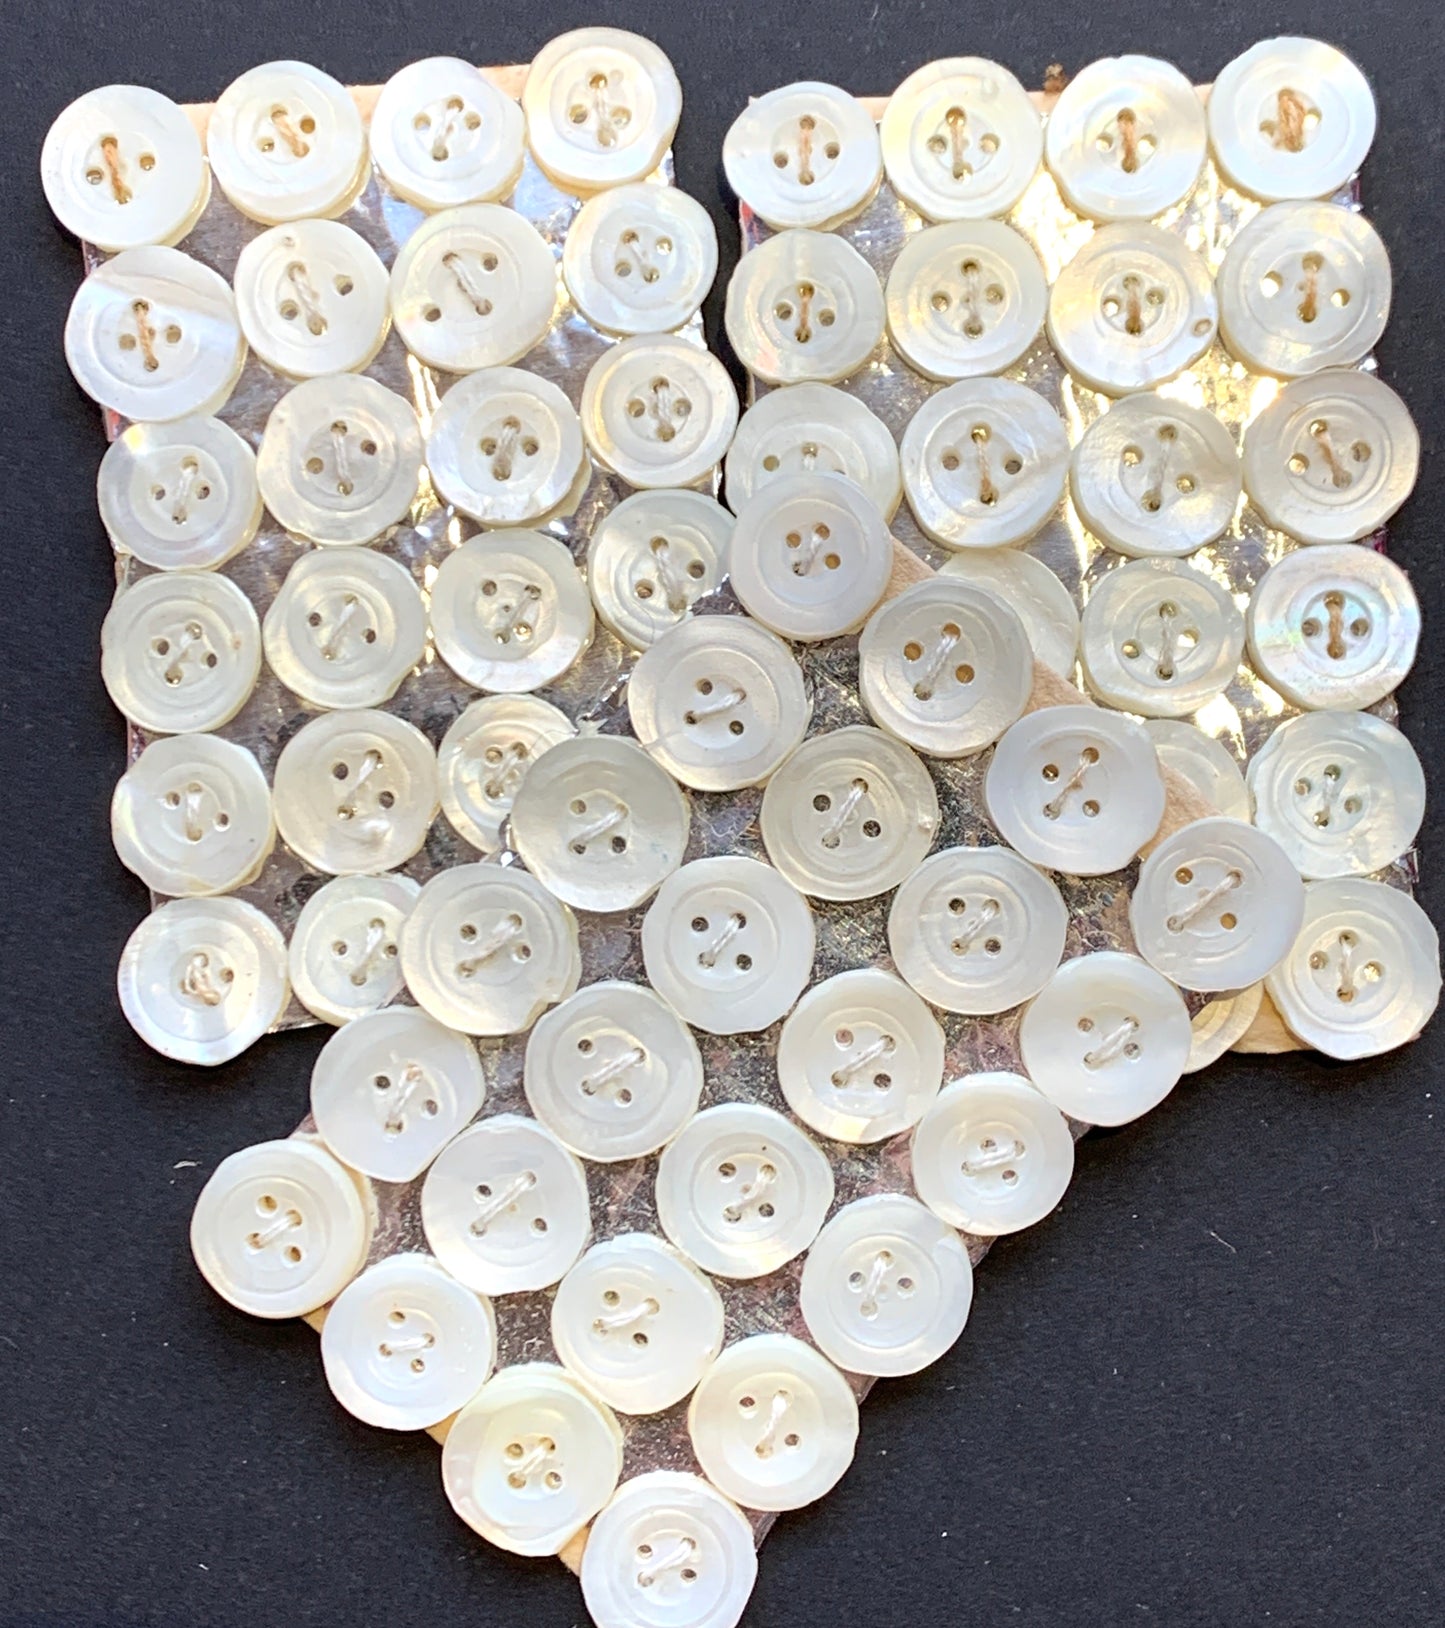 24 Wonderfully Irregular 1cm Vintage Mother of Pearl Buttons on Card